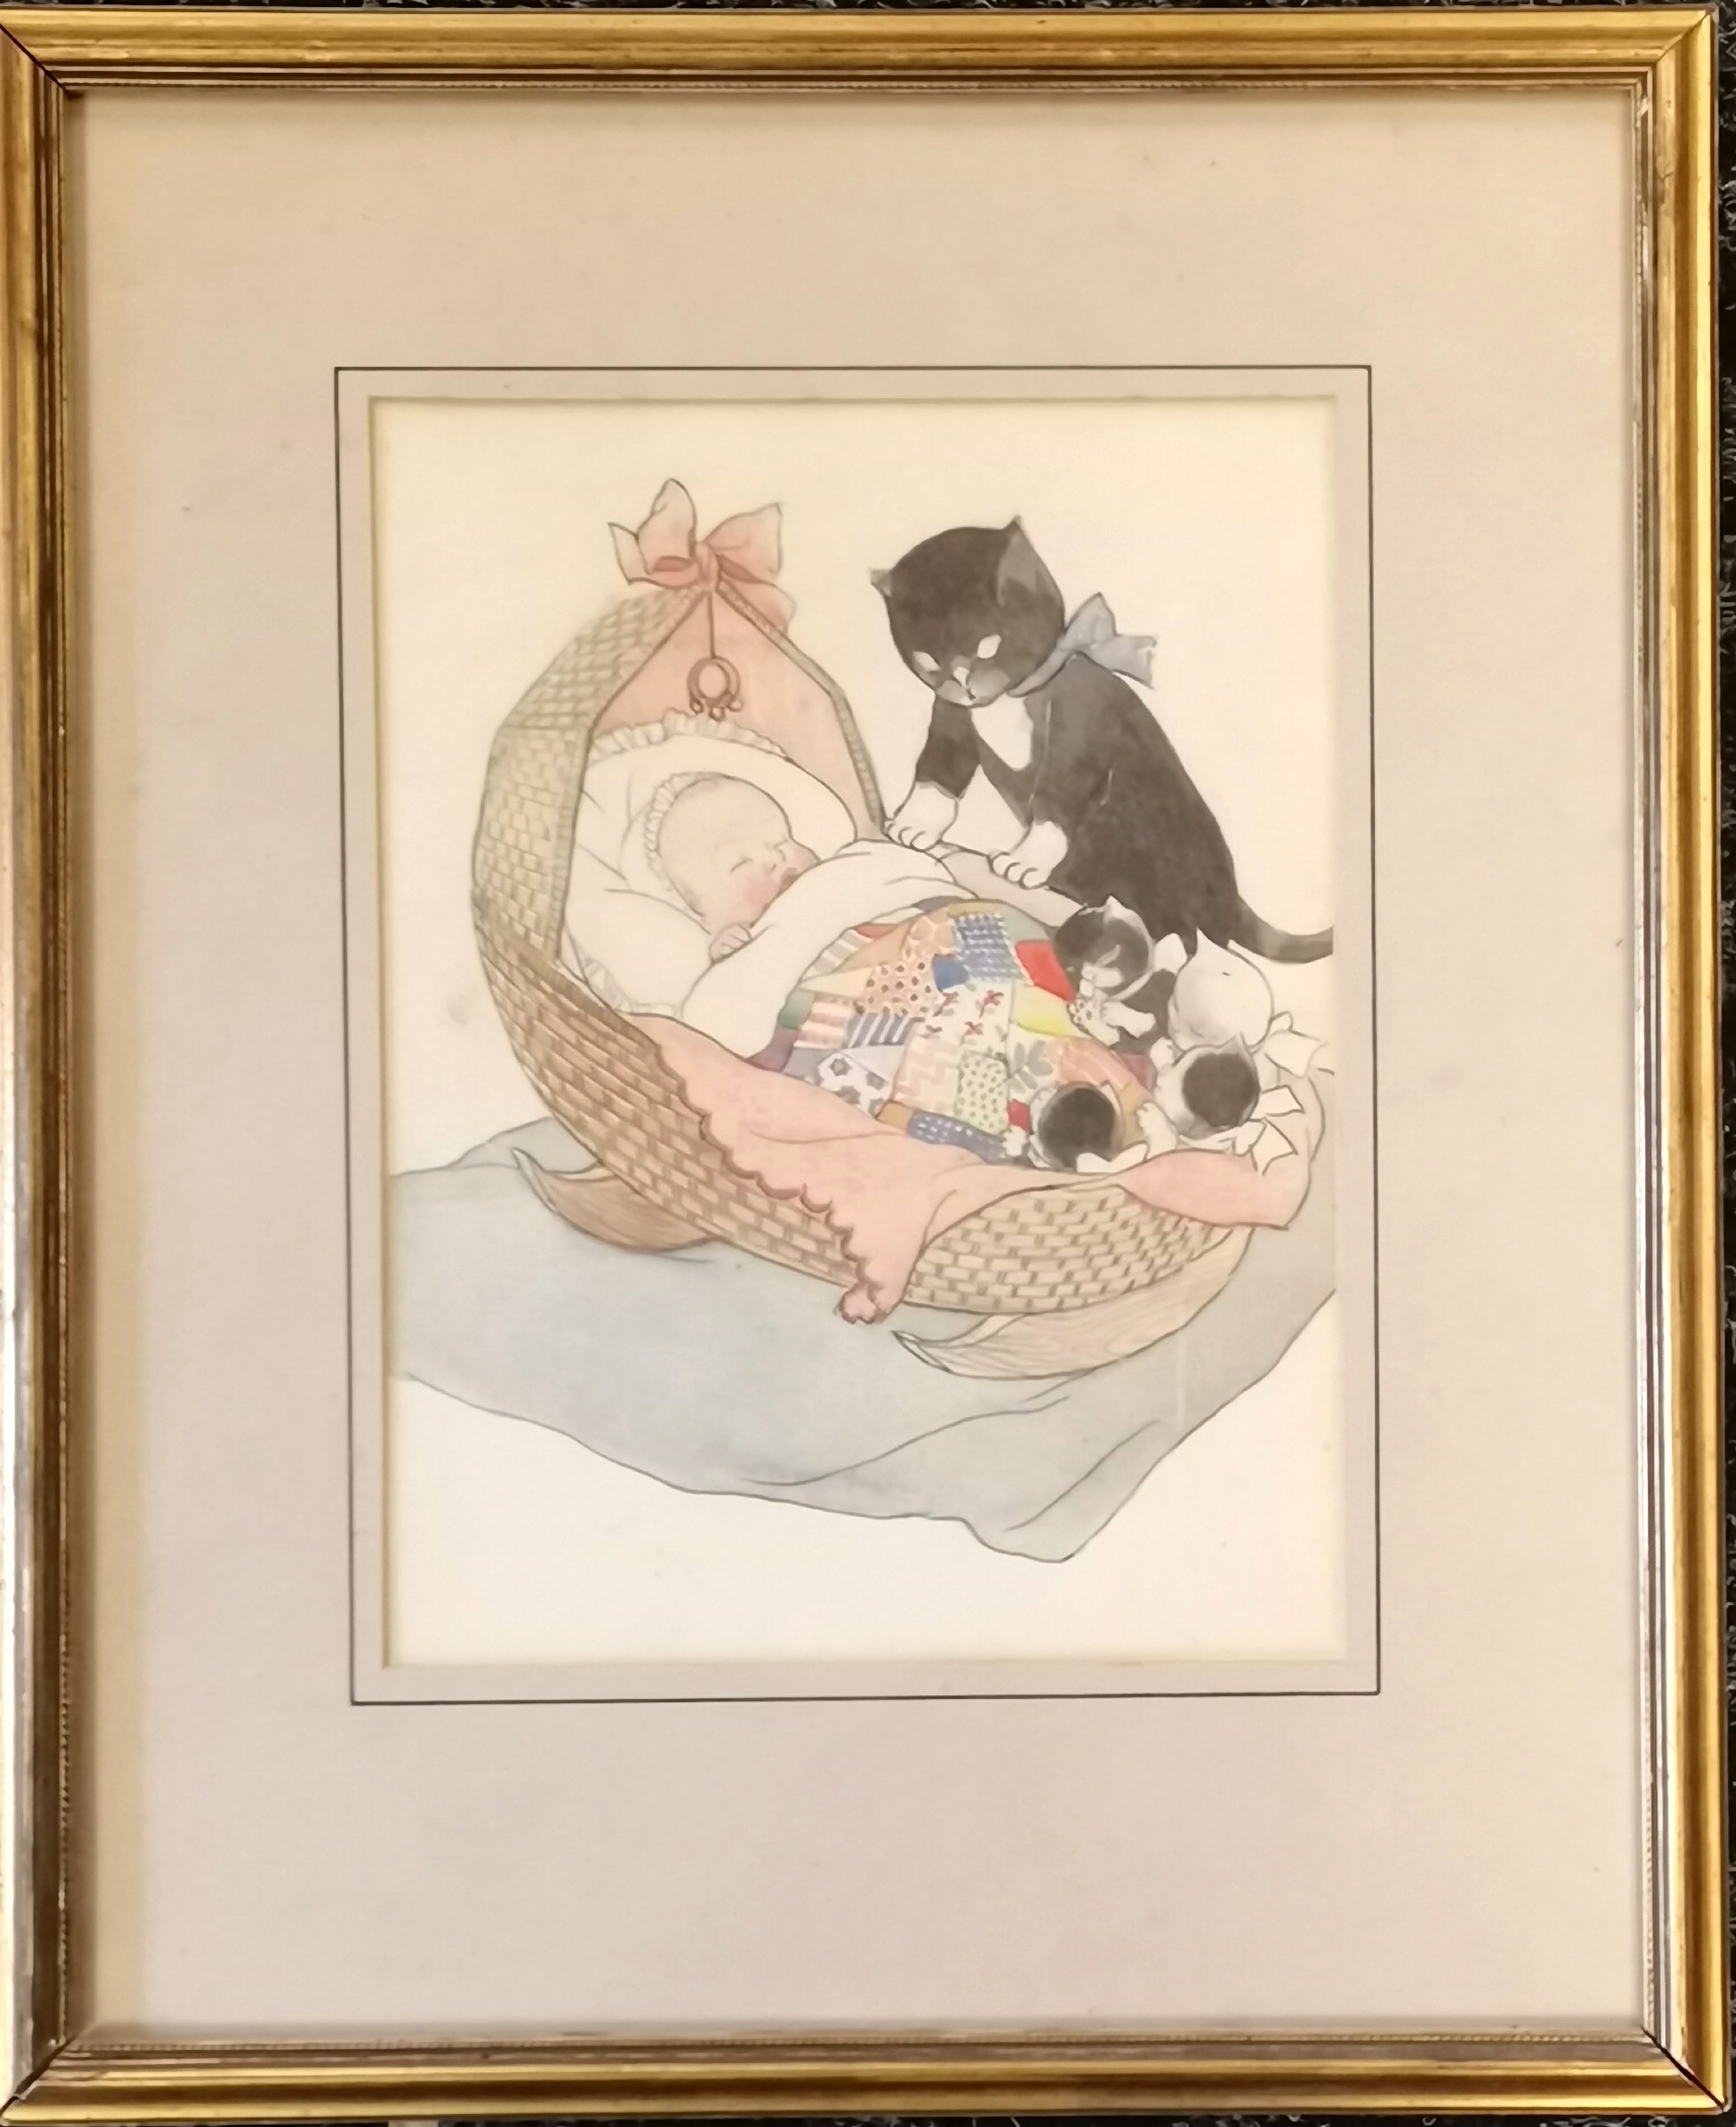 Framed watercolour painting of a child in a crib with a cat and kittens - frame 41cm x 34cm - no - Image 2 of 2